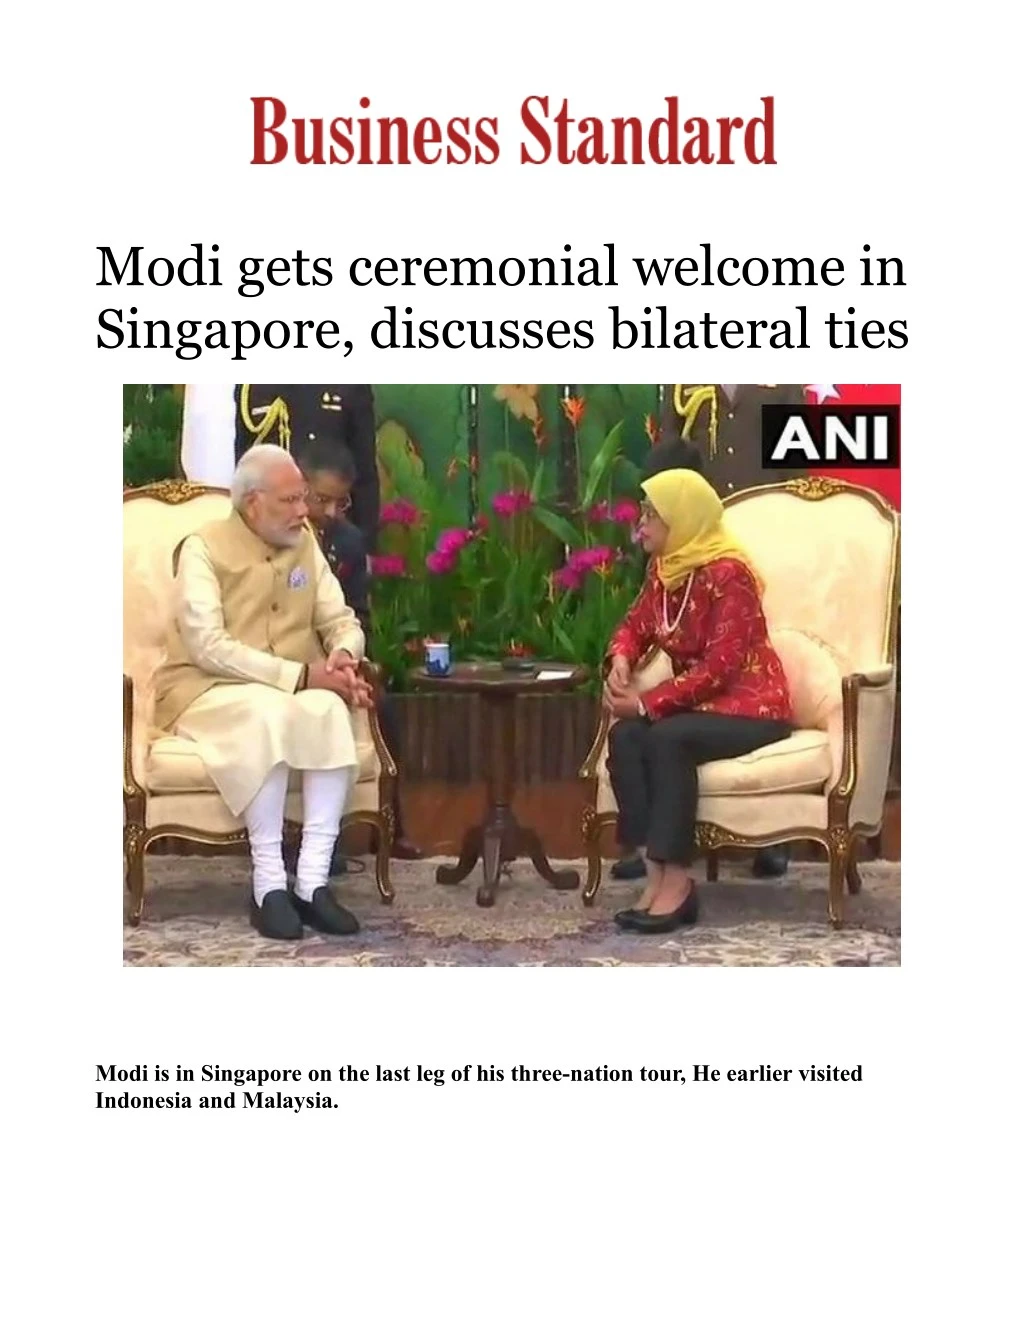 modi gets ceremonial welcome in singapore